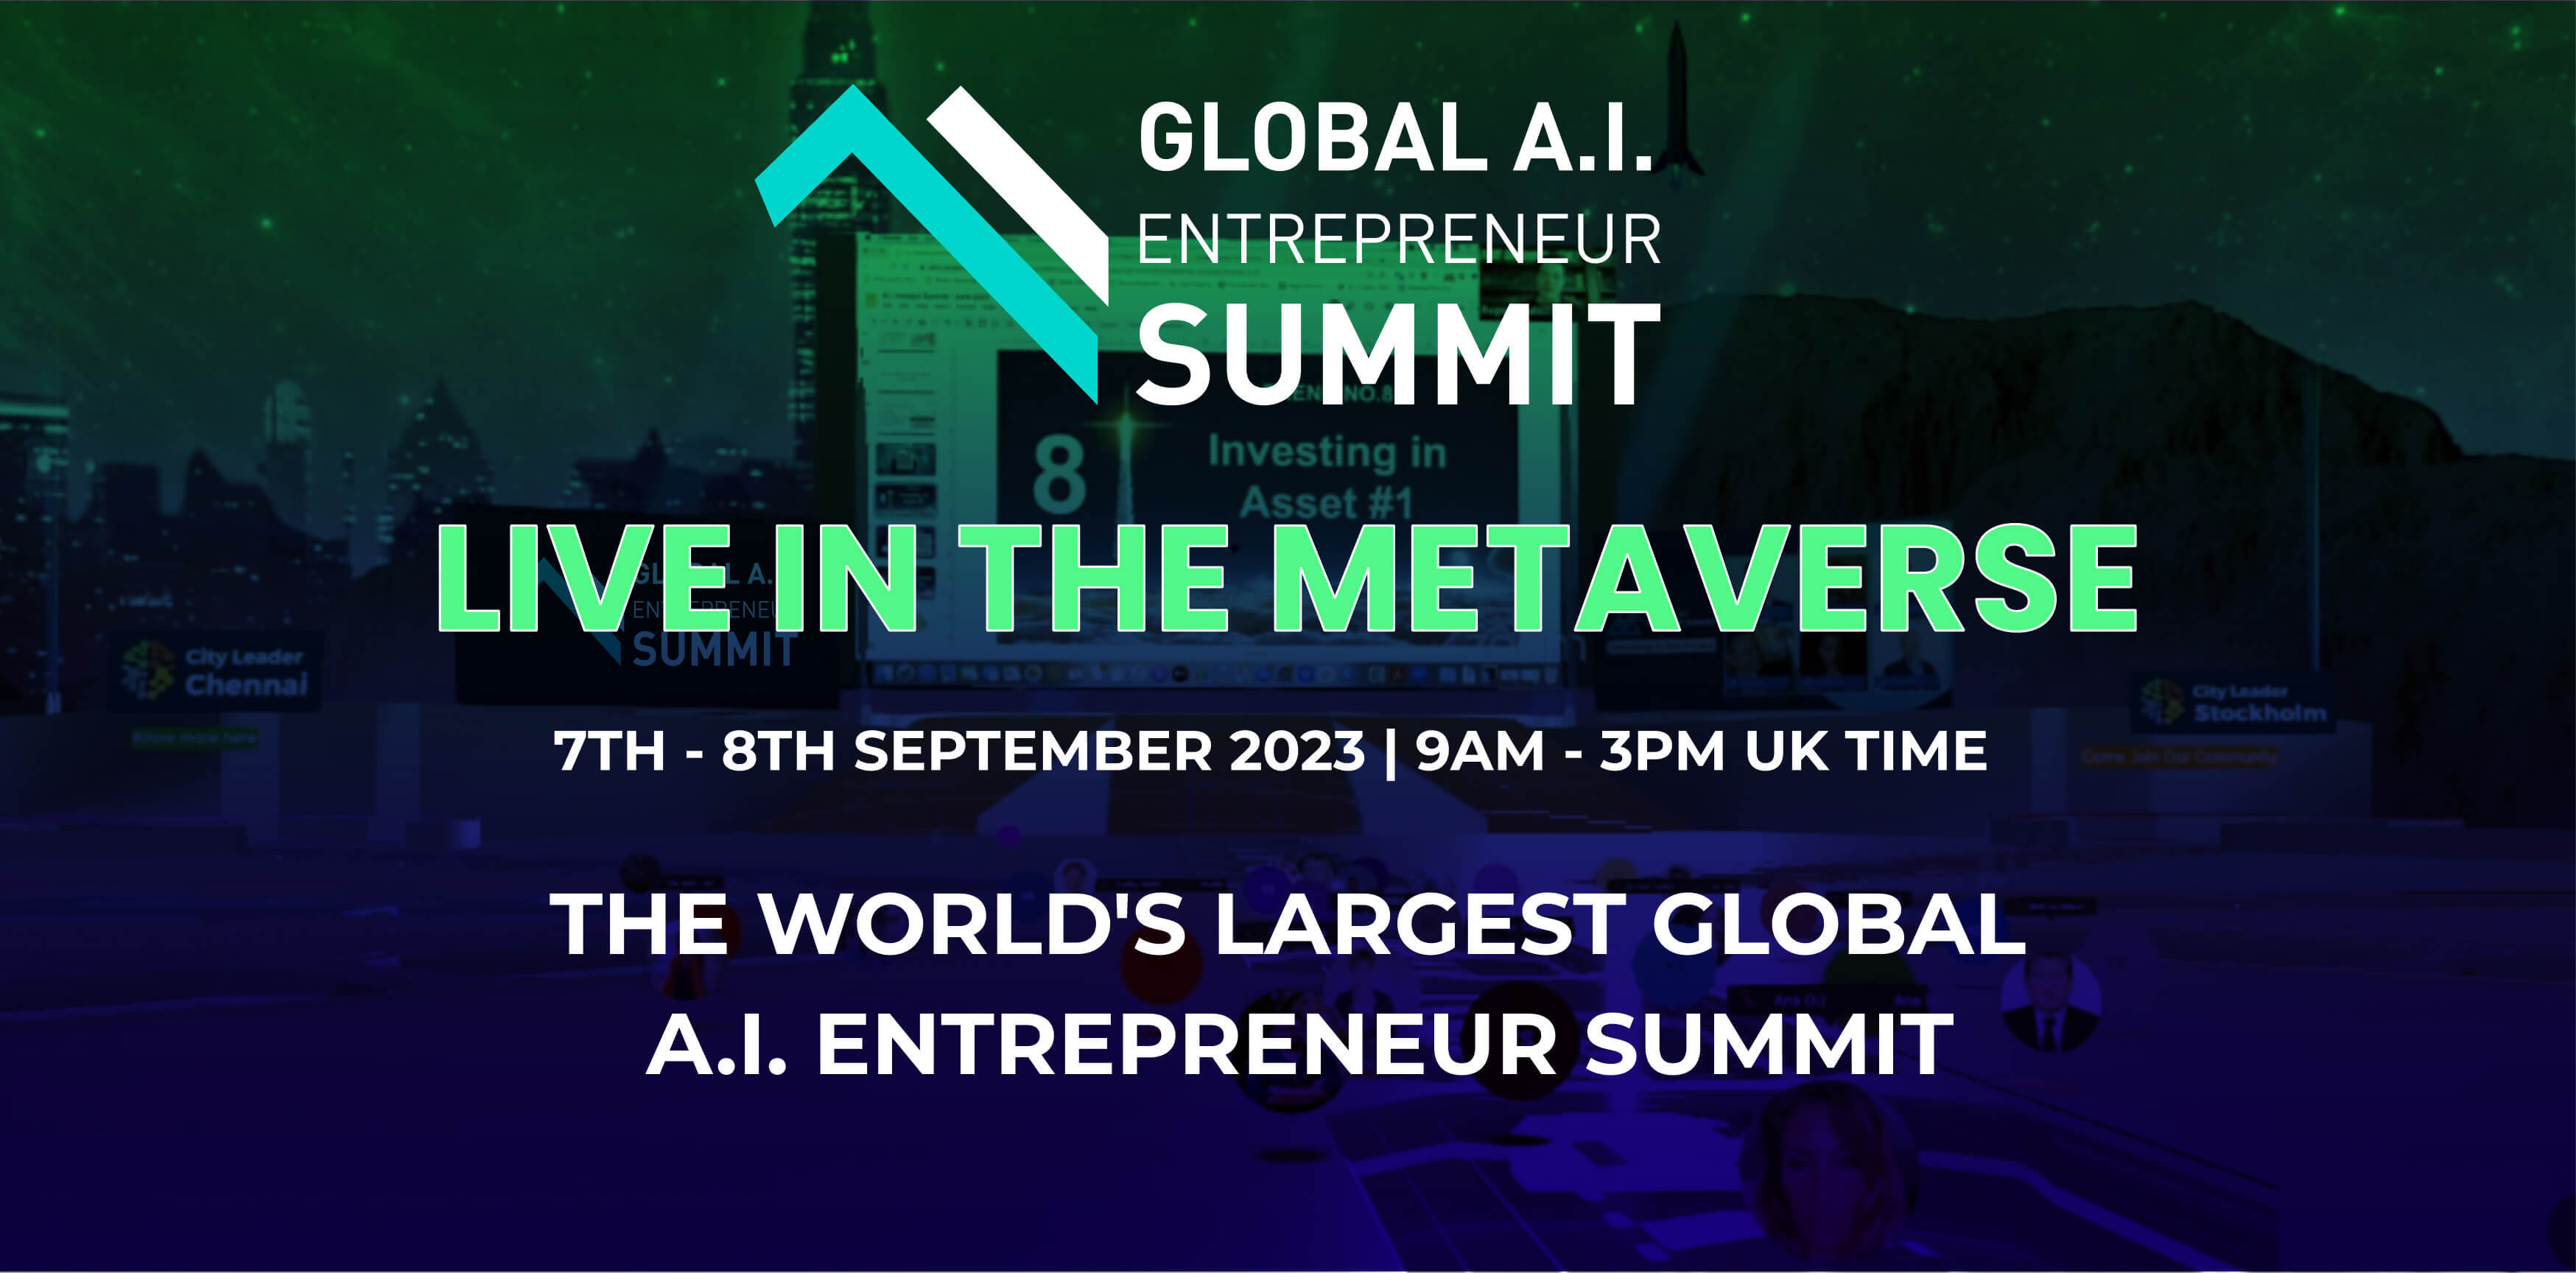 JOIN THE Global A.I. Entrepreneur Summit